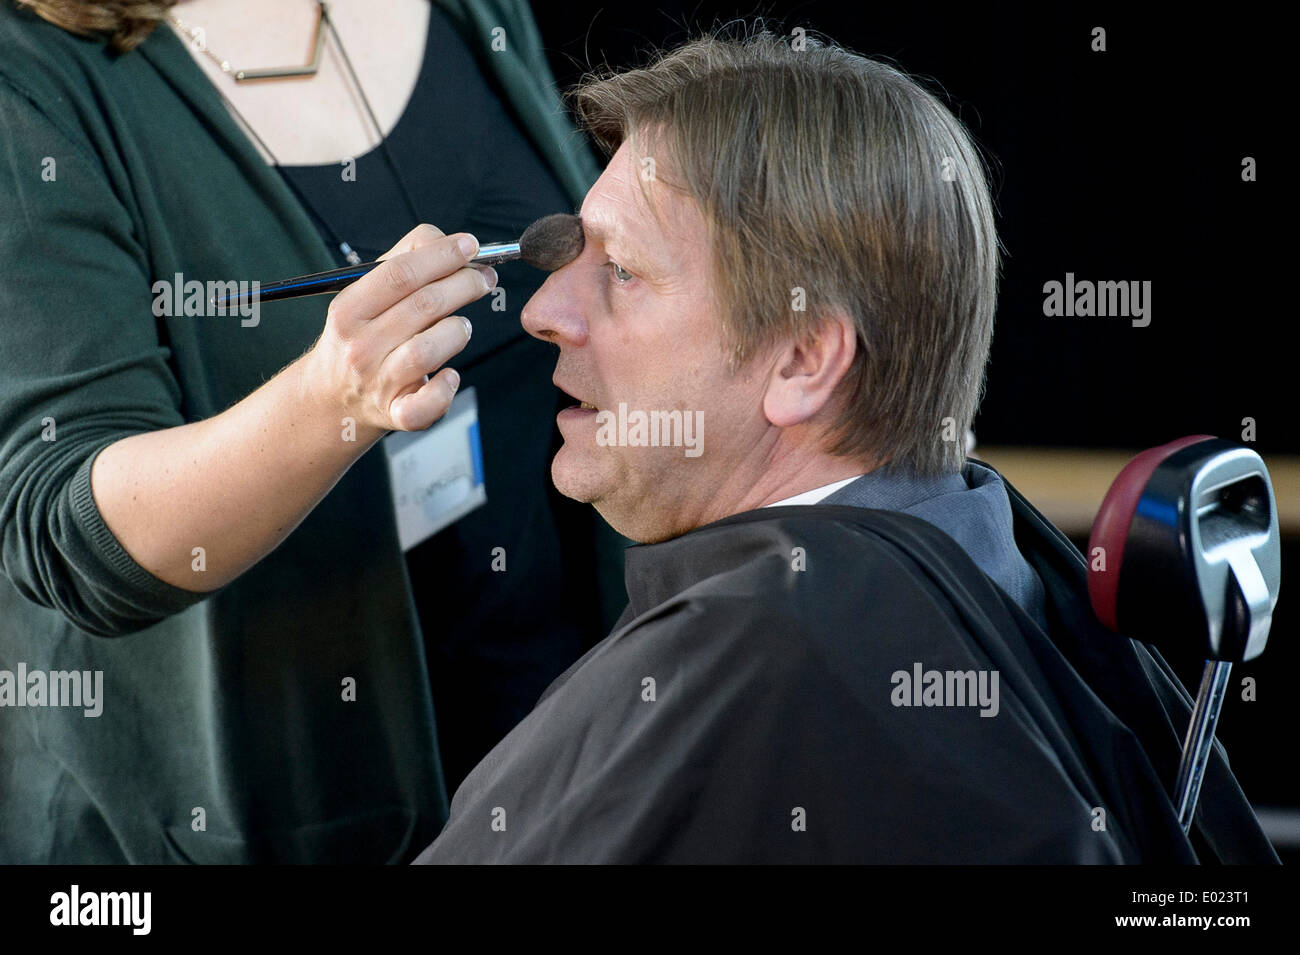 Brussels, Bxl, Belgium. 29th Apr, 2014. Guy Verhofstadt, top candidate of Liberals (ALDE) receives the make-up ahead of Euranet's 'Big Crunch' Presidential debate at the EU parliament in Brussels, Belgium on 29.04.2014 The four top candidates for the presidency of the European Commission - Jean-Claude Juncker, Ska Keller, Martin Schulz and Guy Verhofstadt - attend EU-wide debate organized by EuranetPlus and focused on the major election topics. by Wiktor Dabkowski Credit:  Wiktor Dabkowski/ZUMAPRESS.com/Alamy Live News Stock Photo